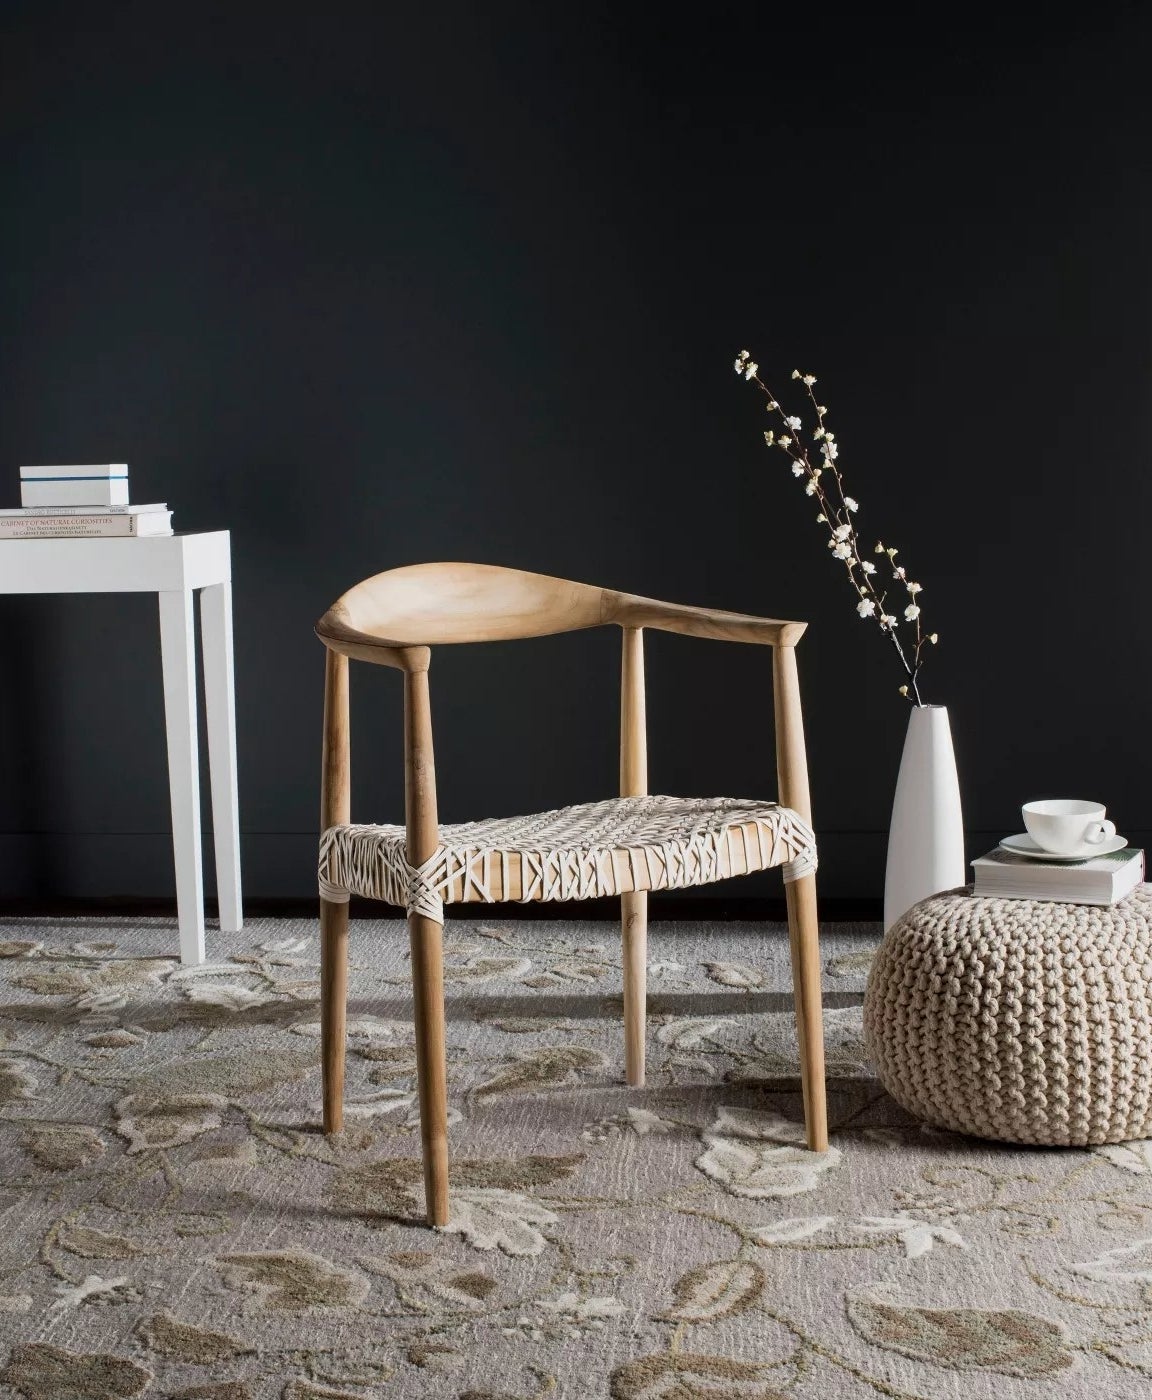 The white and teak armchair